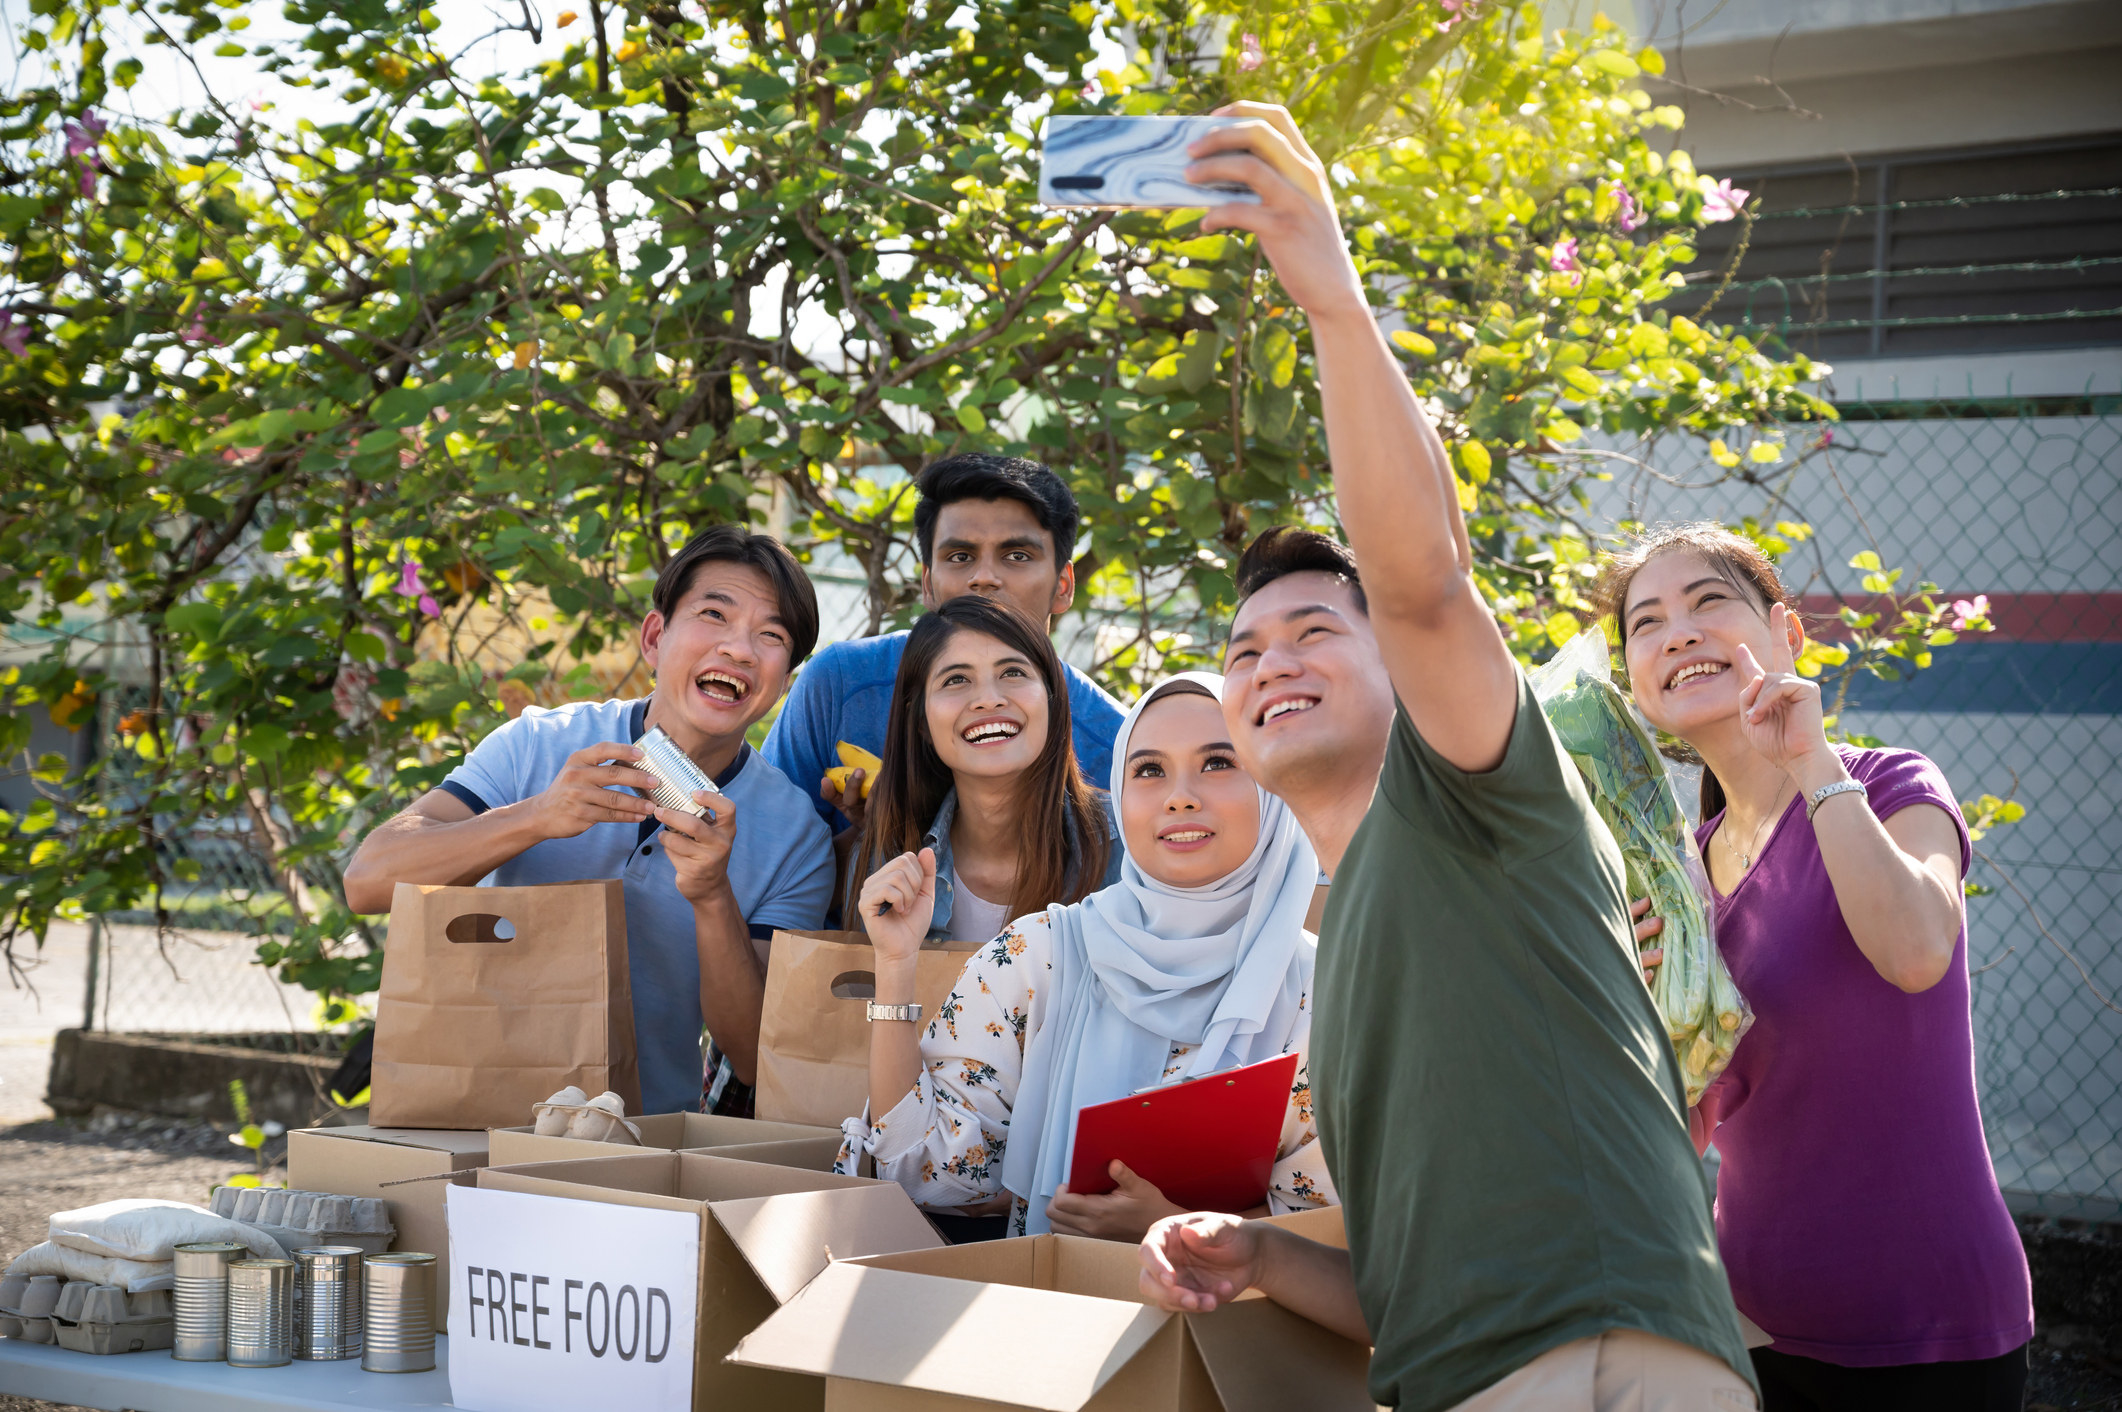 People taking a selfie while giving out free food